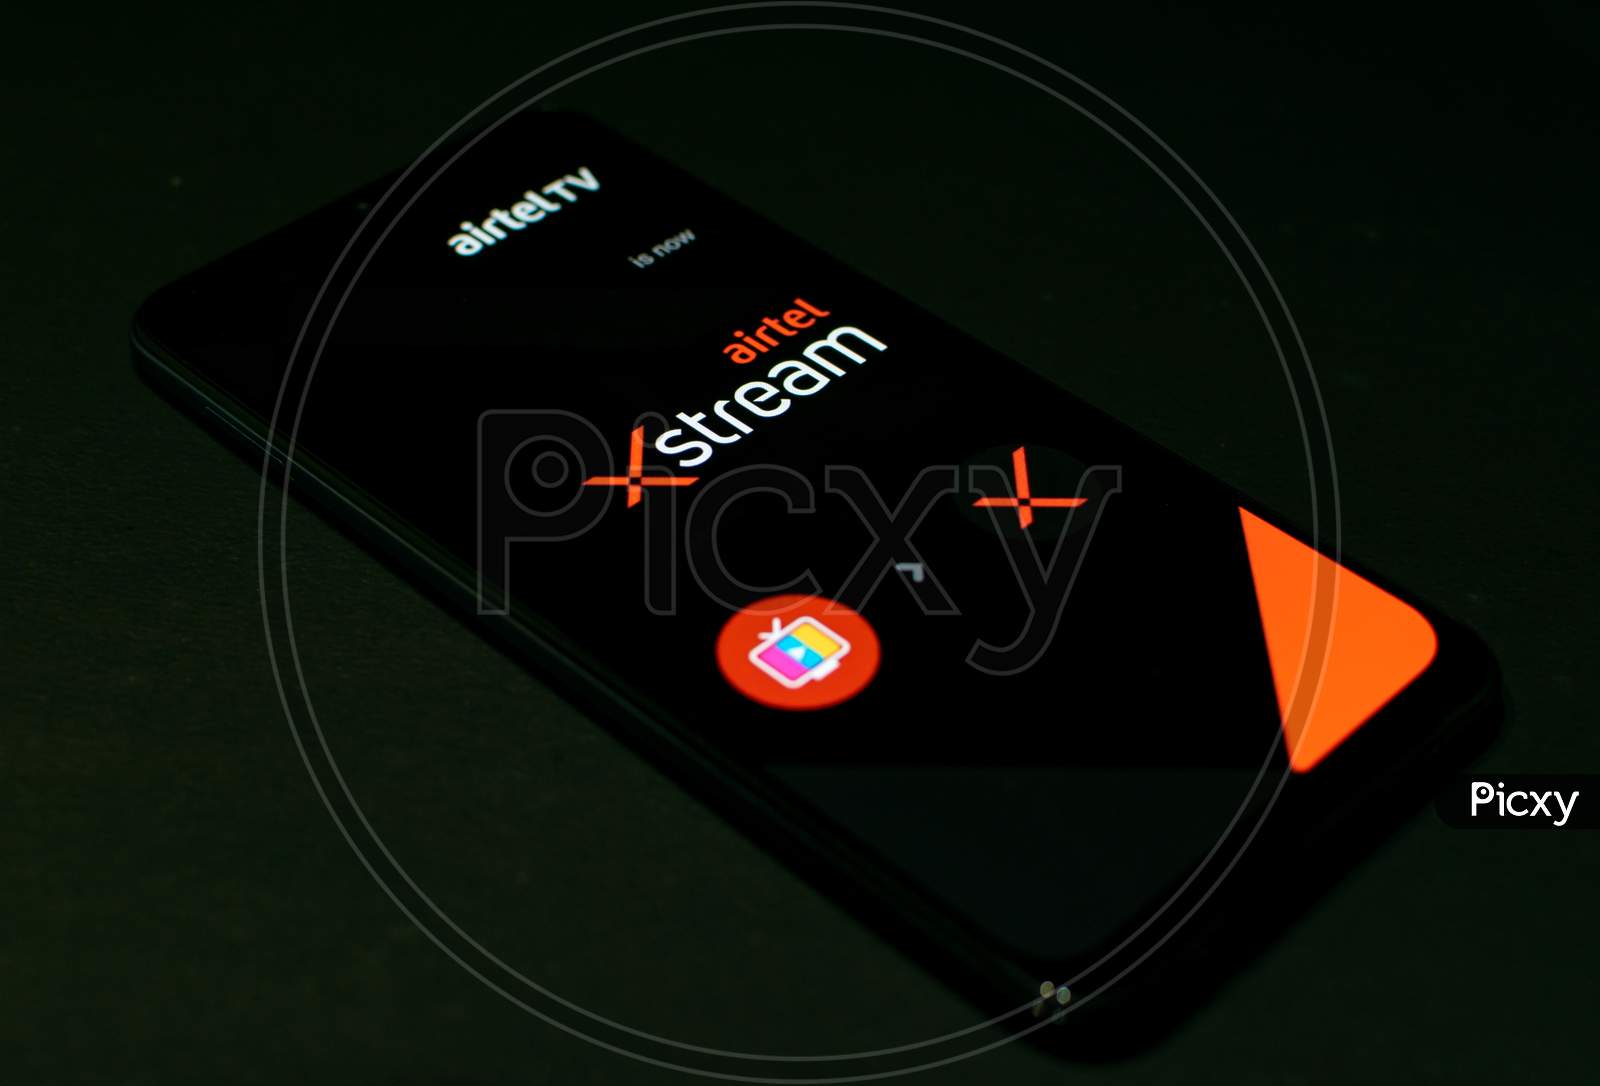 Airtel Xstream application on Smartphone screen. This app is a freeware in Android Playstore developed by Airtel